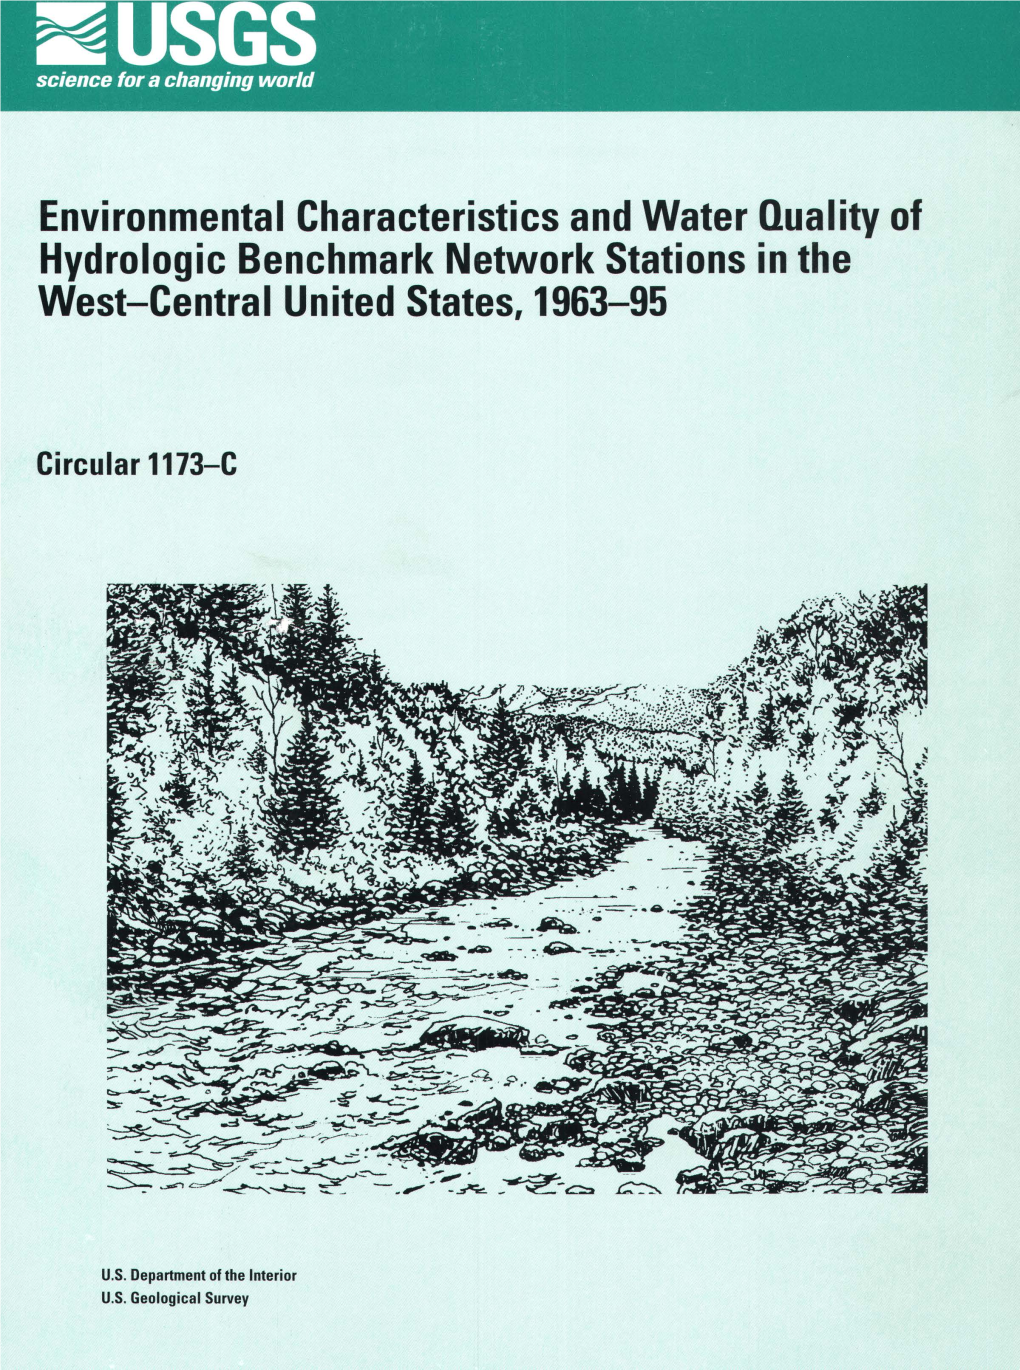 Environmental Characteristics and Water Quality of Hydrologic Benchmark Network Stations in the West-Central United States, 1963-95